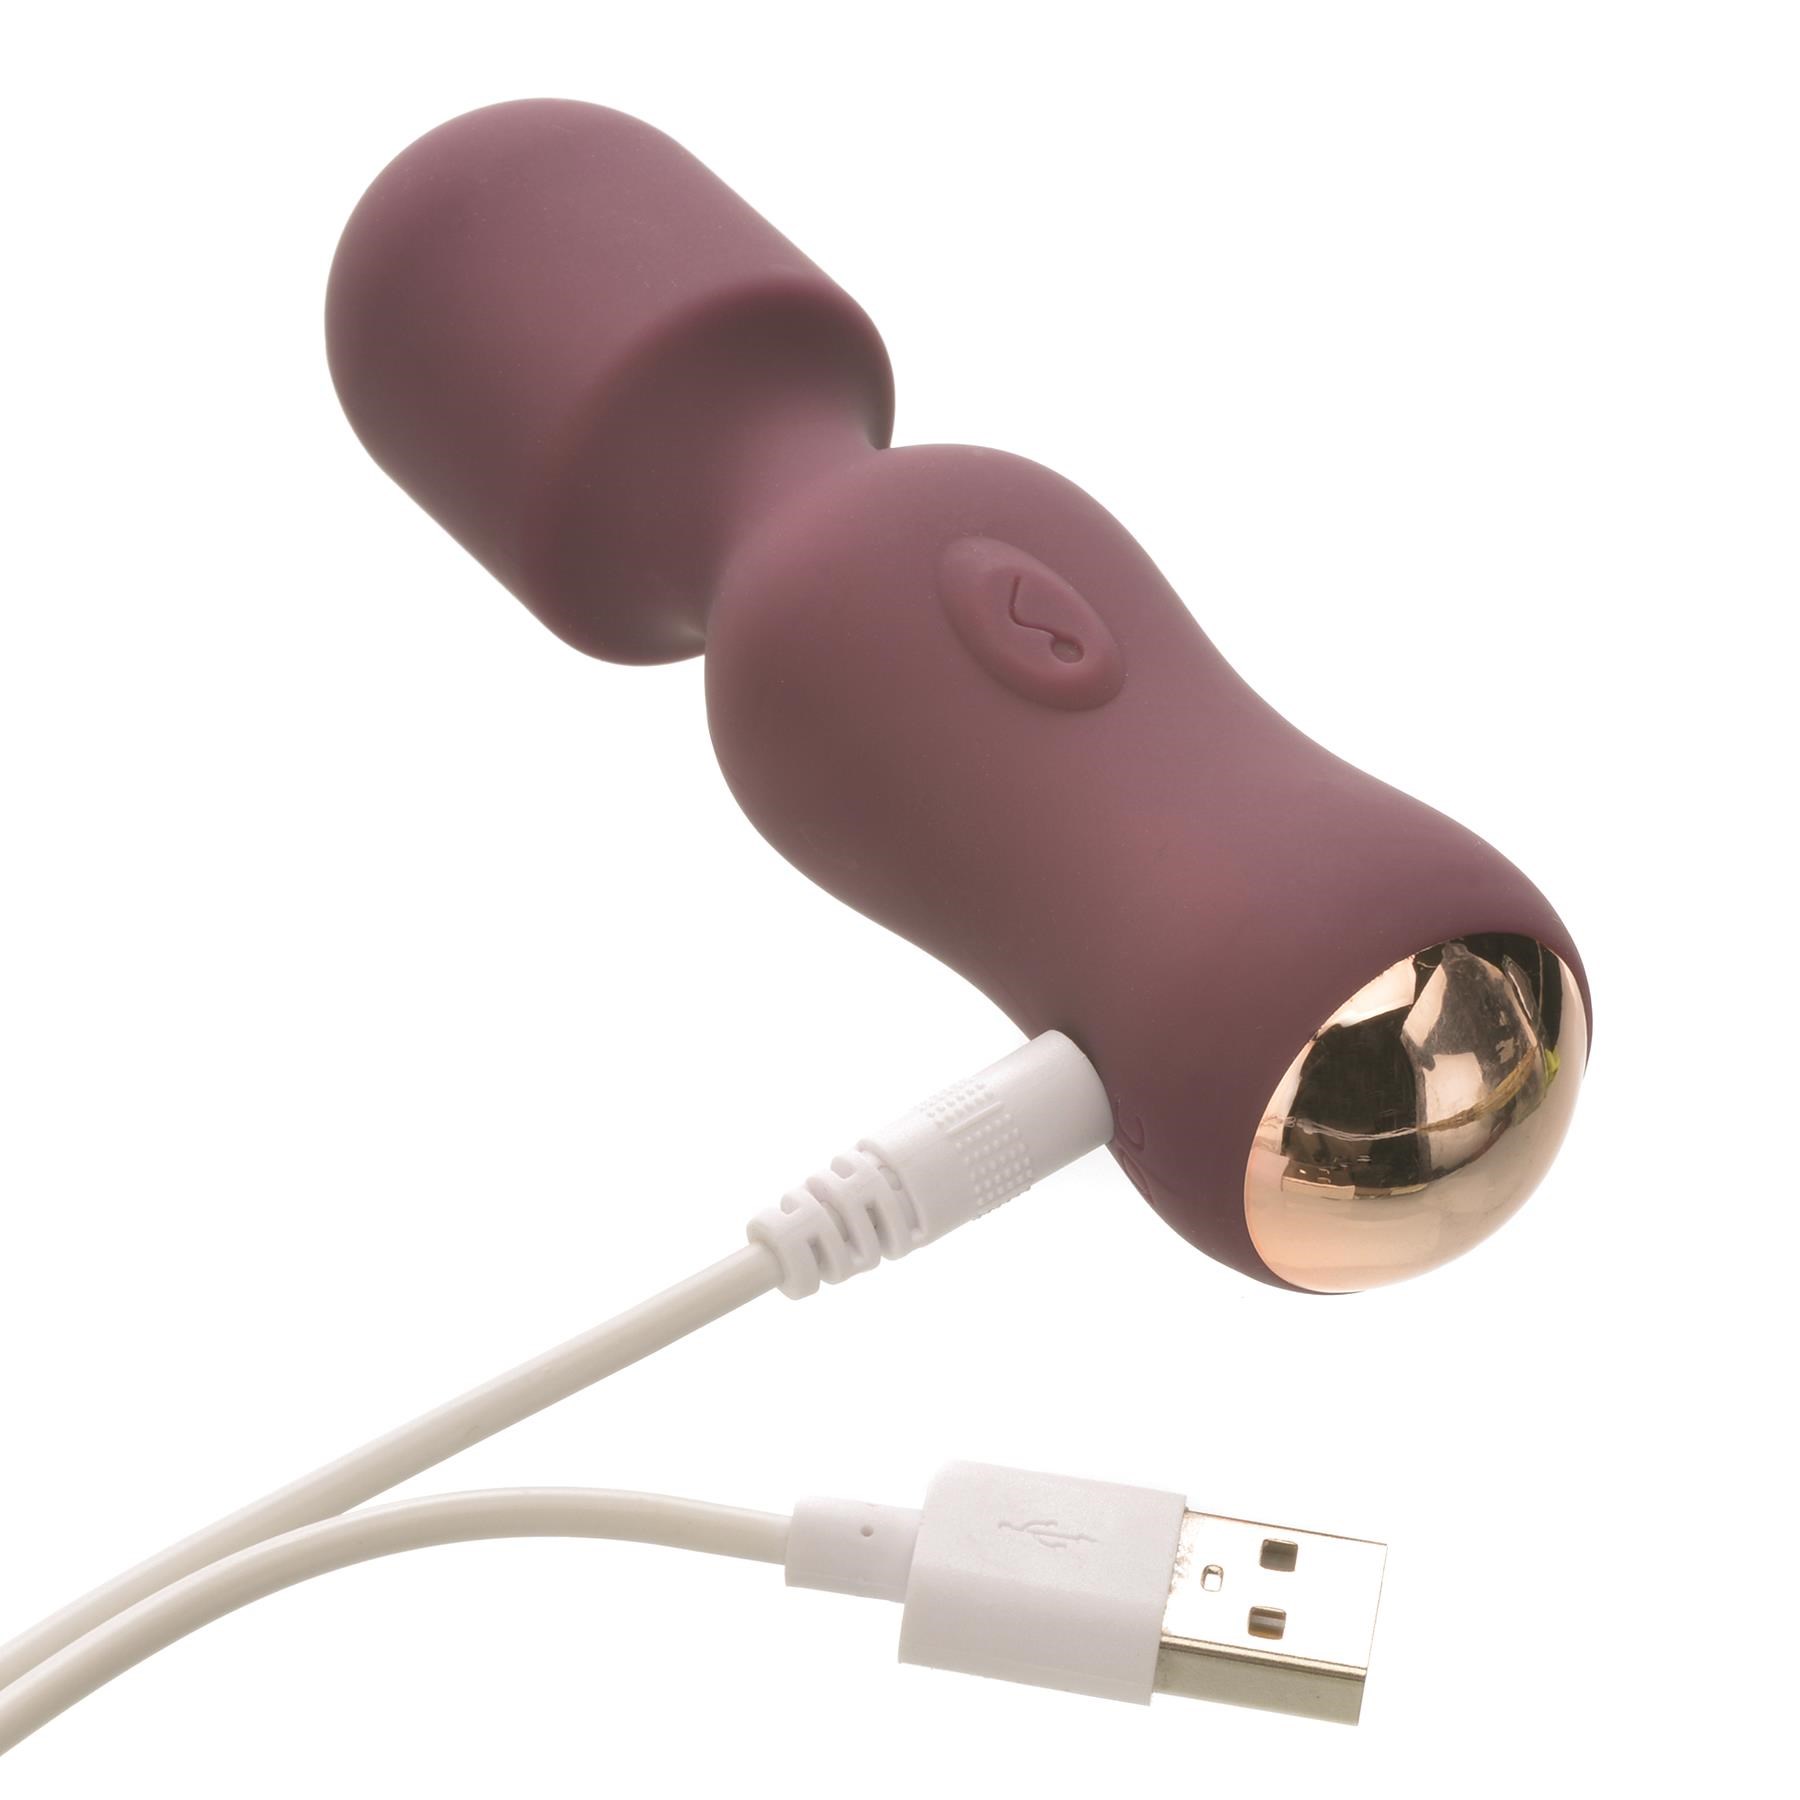 Lover's Kits Temptation Vibrator Kit - Showing Where Charging Cable is Placed